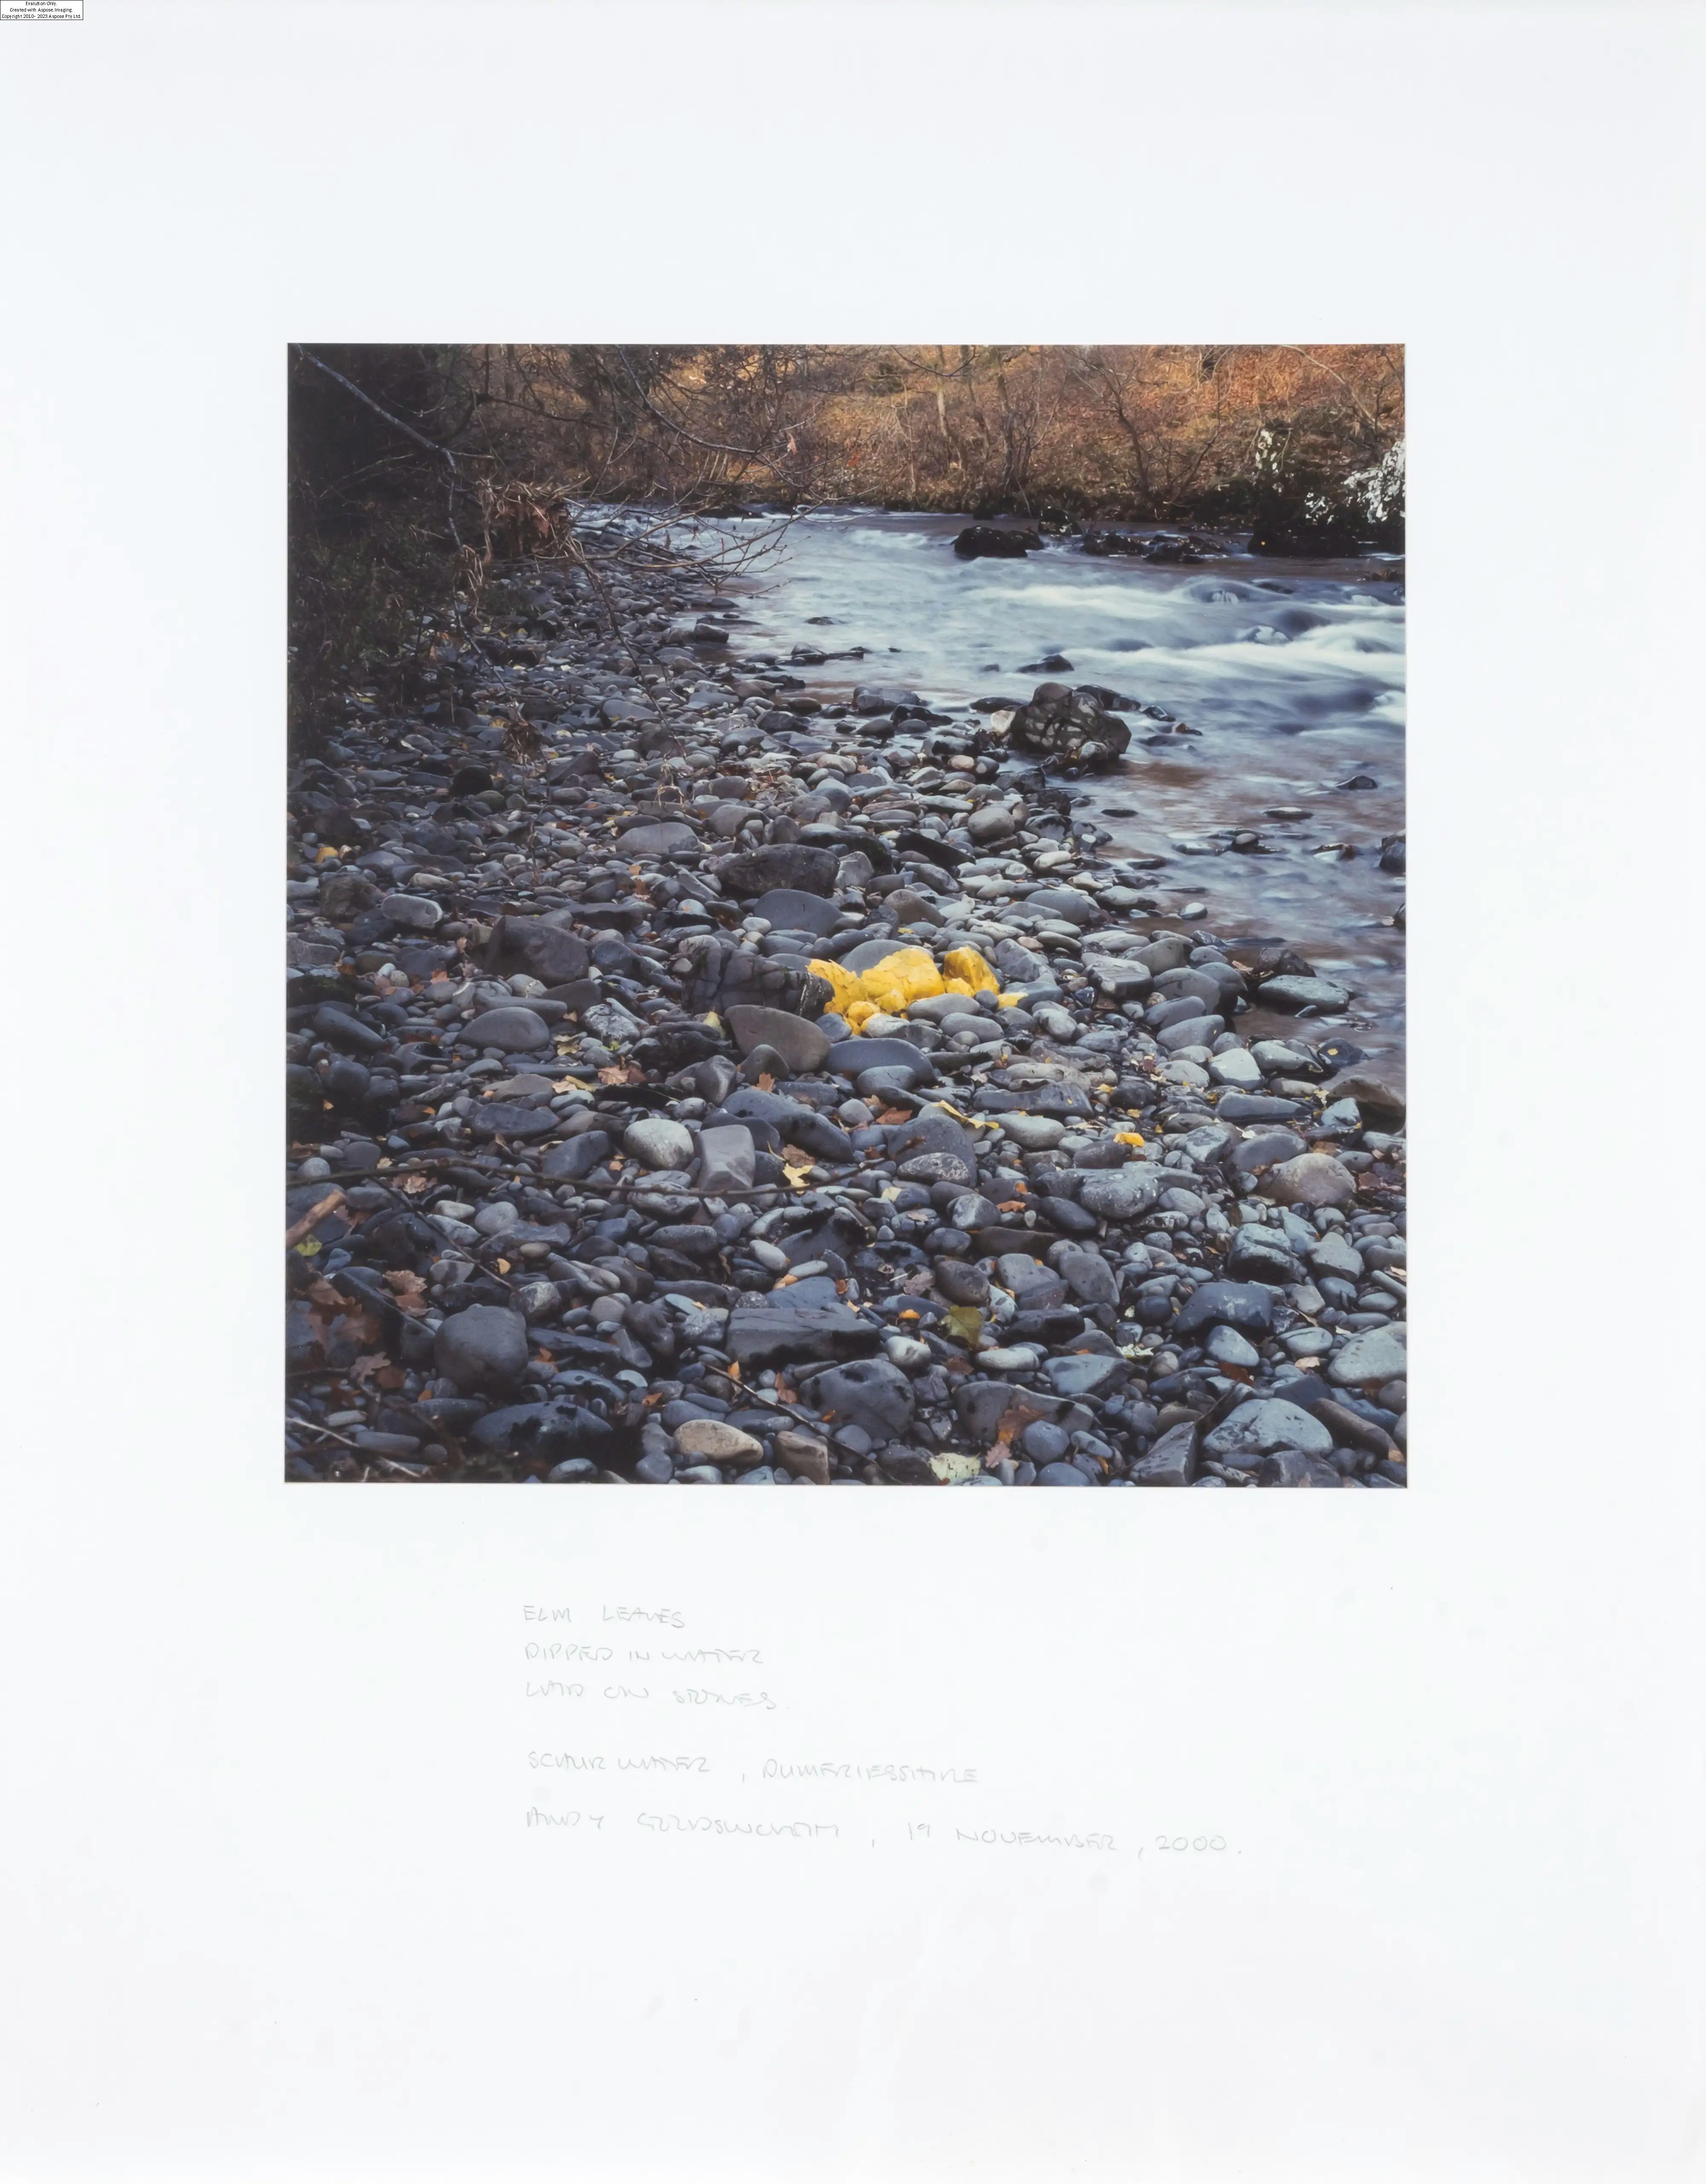 Andy Goldsworthy (b.1956) Elm Leaves Dipped in Water Laid on Stones - Andy Goldsworthy